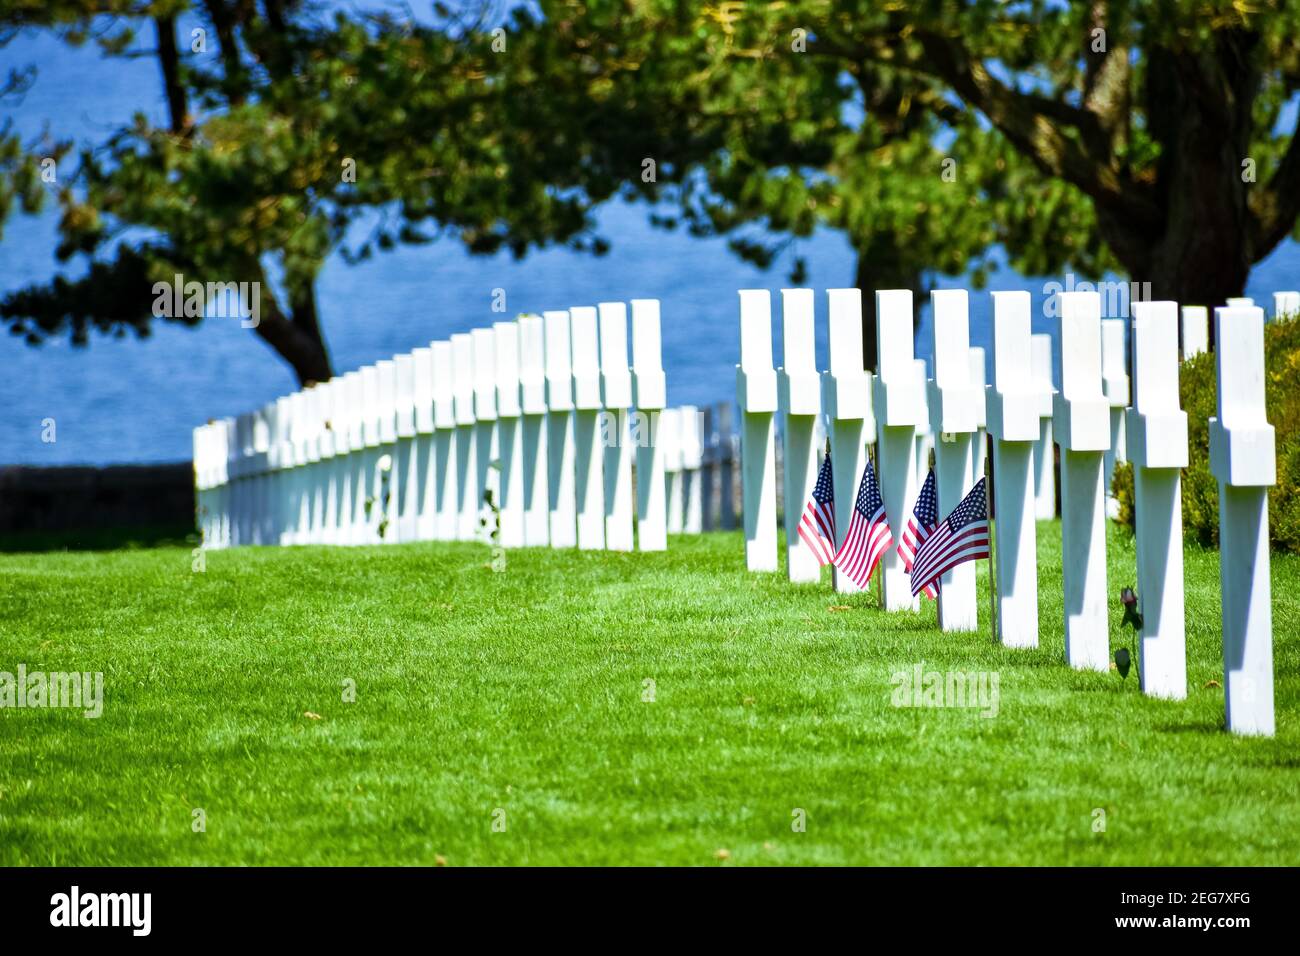 NORMANDY, FRANCE - July 5, 2017: Detail of headstones with cross and American flags in the American Cemetery of the Battle of the Normandy Landings du Stock Photo